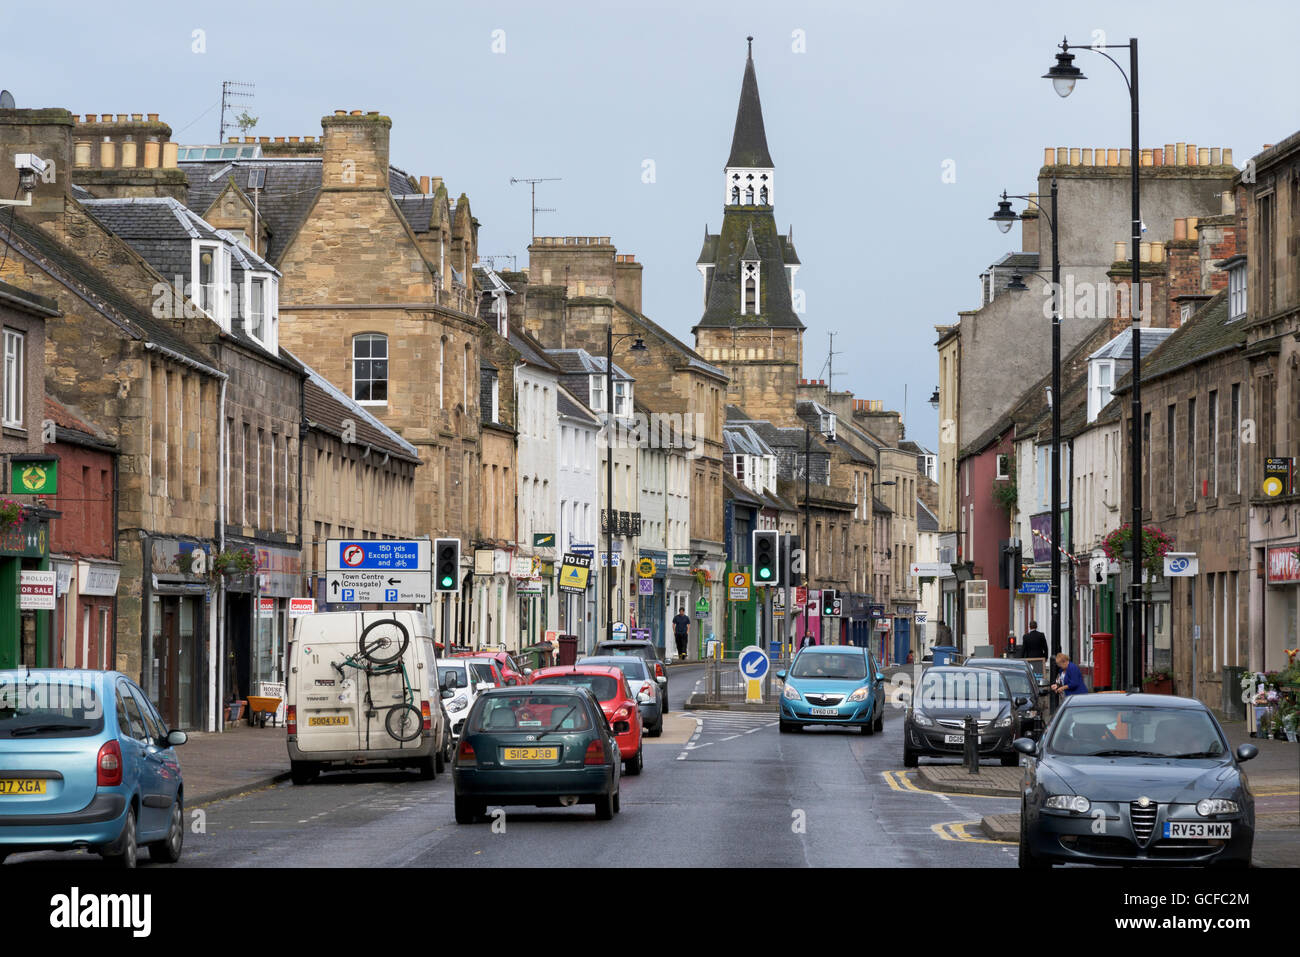 A busy street with traffic, buildings and a tower against a cloudy sky; Cupar, Fife, Scotland Stock Photo